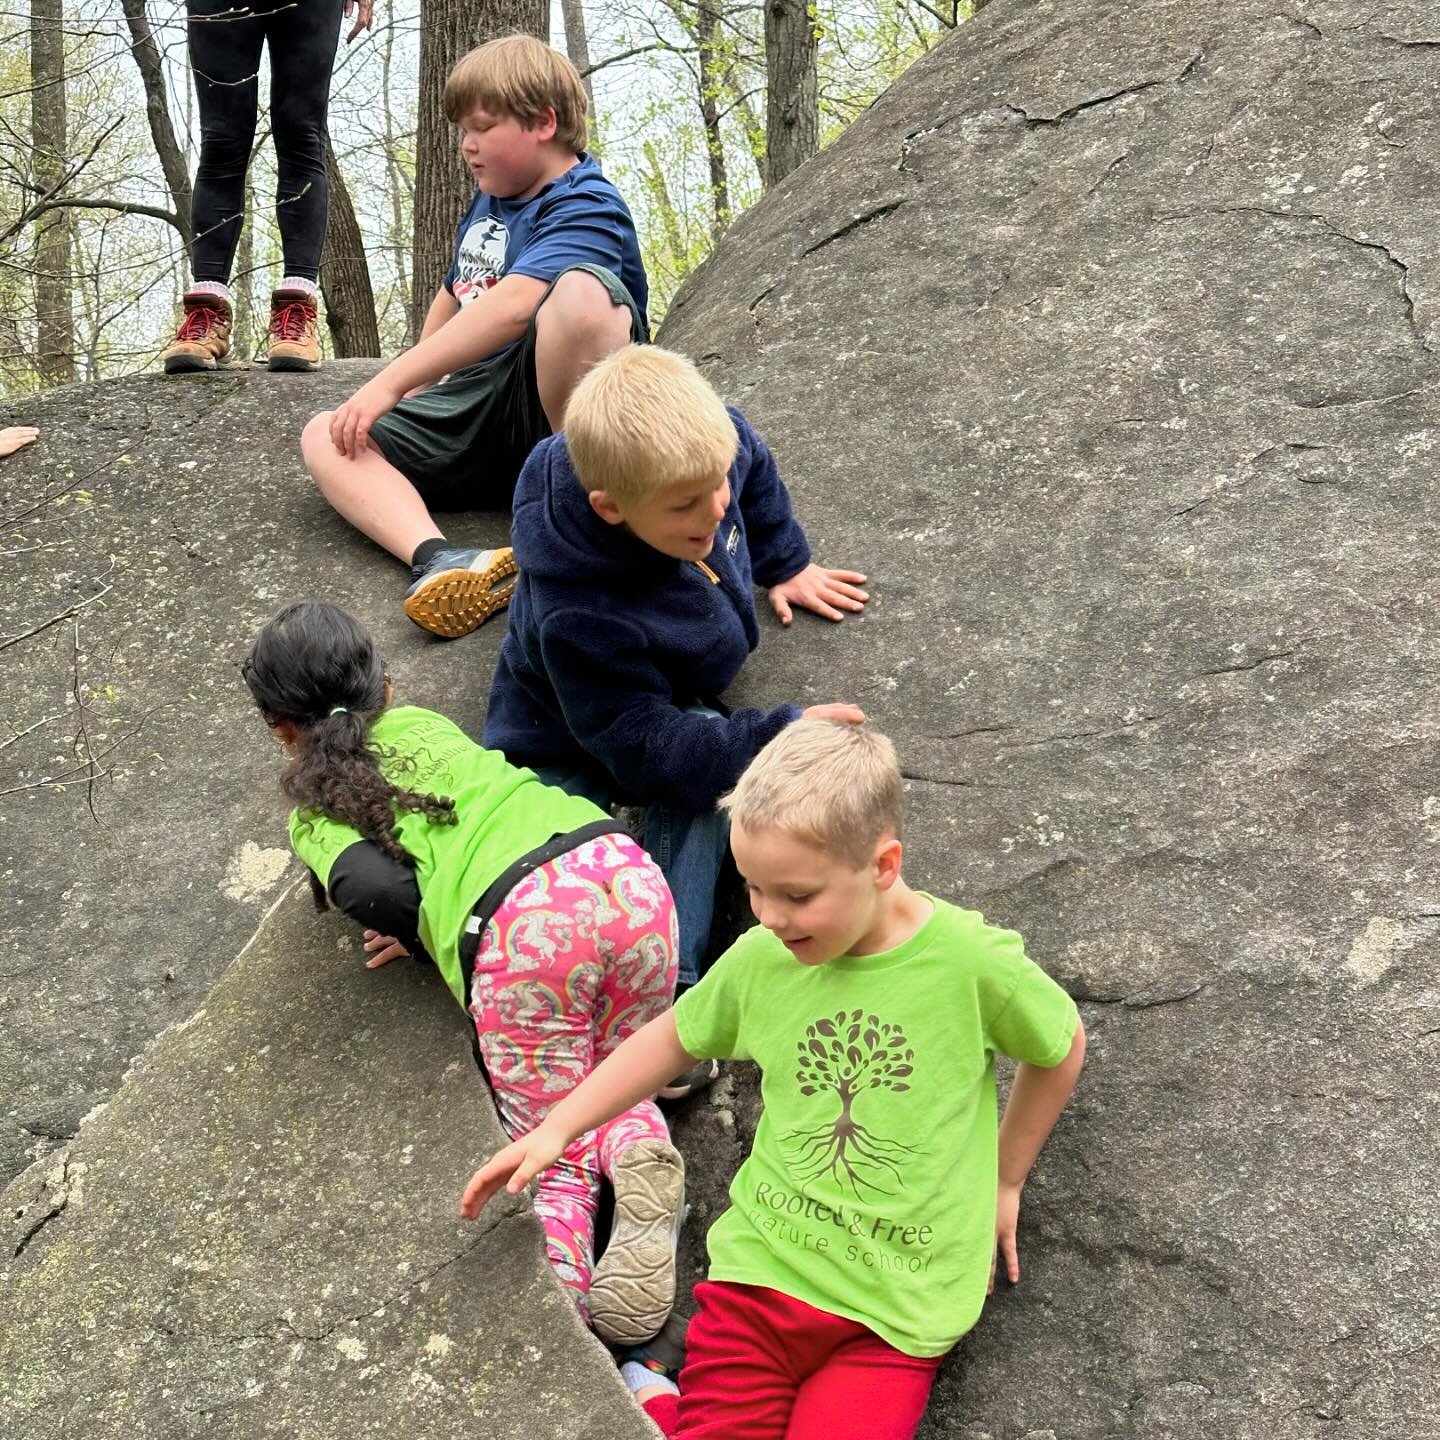 (1/2) Today we got to spend time at one of our favorite places - Buzzard&rsquo;s Rock! We left right away to spend as much time there as possible, and had fun moving along the paths that are much greener than they were during our last trip there this